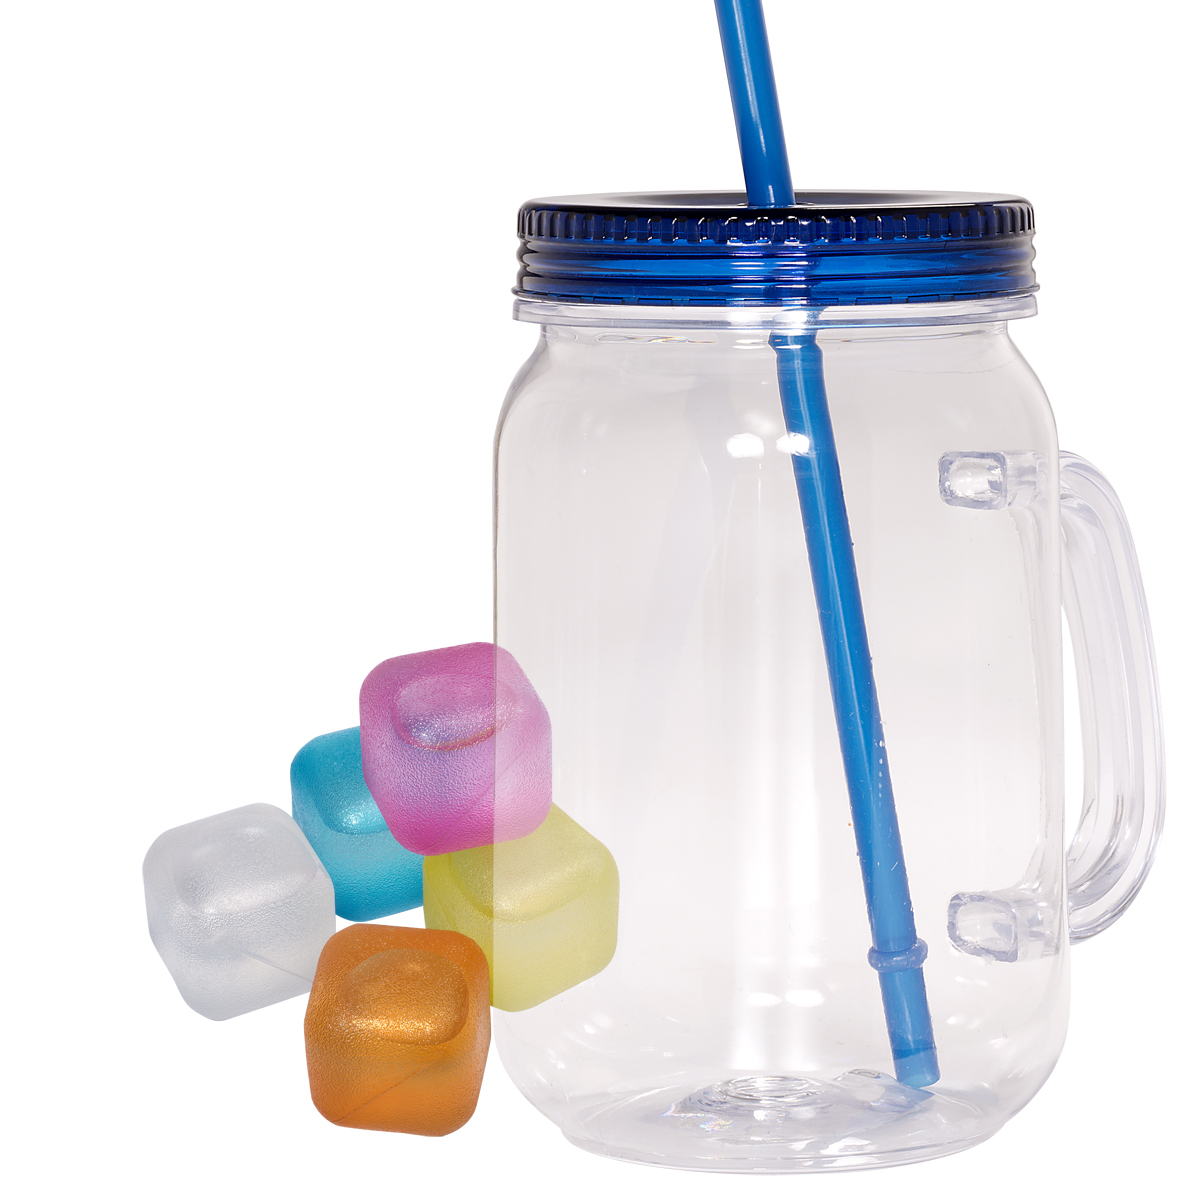 Country Mason Jar Sipper and Ice Cubes Set